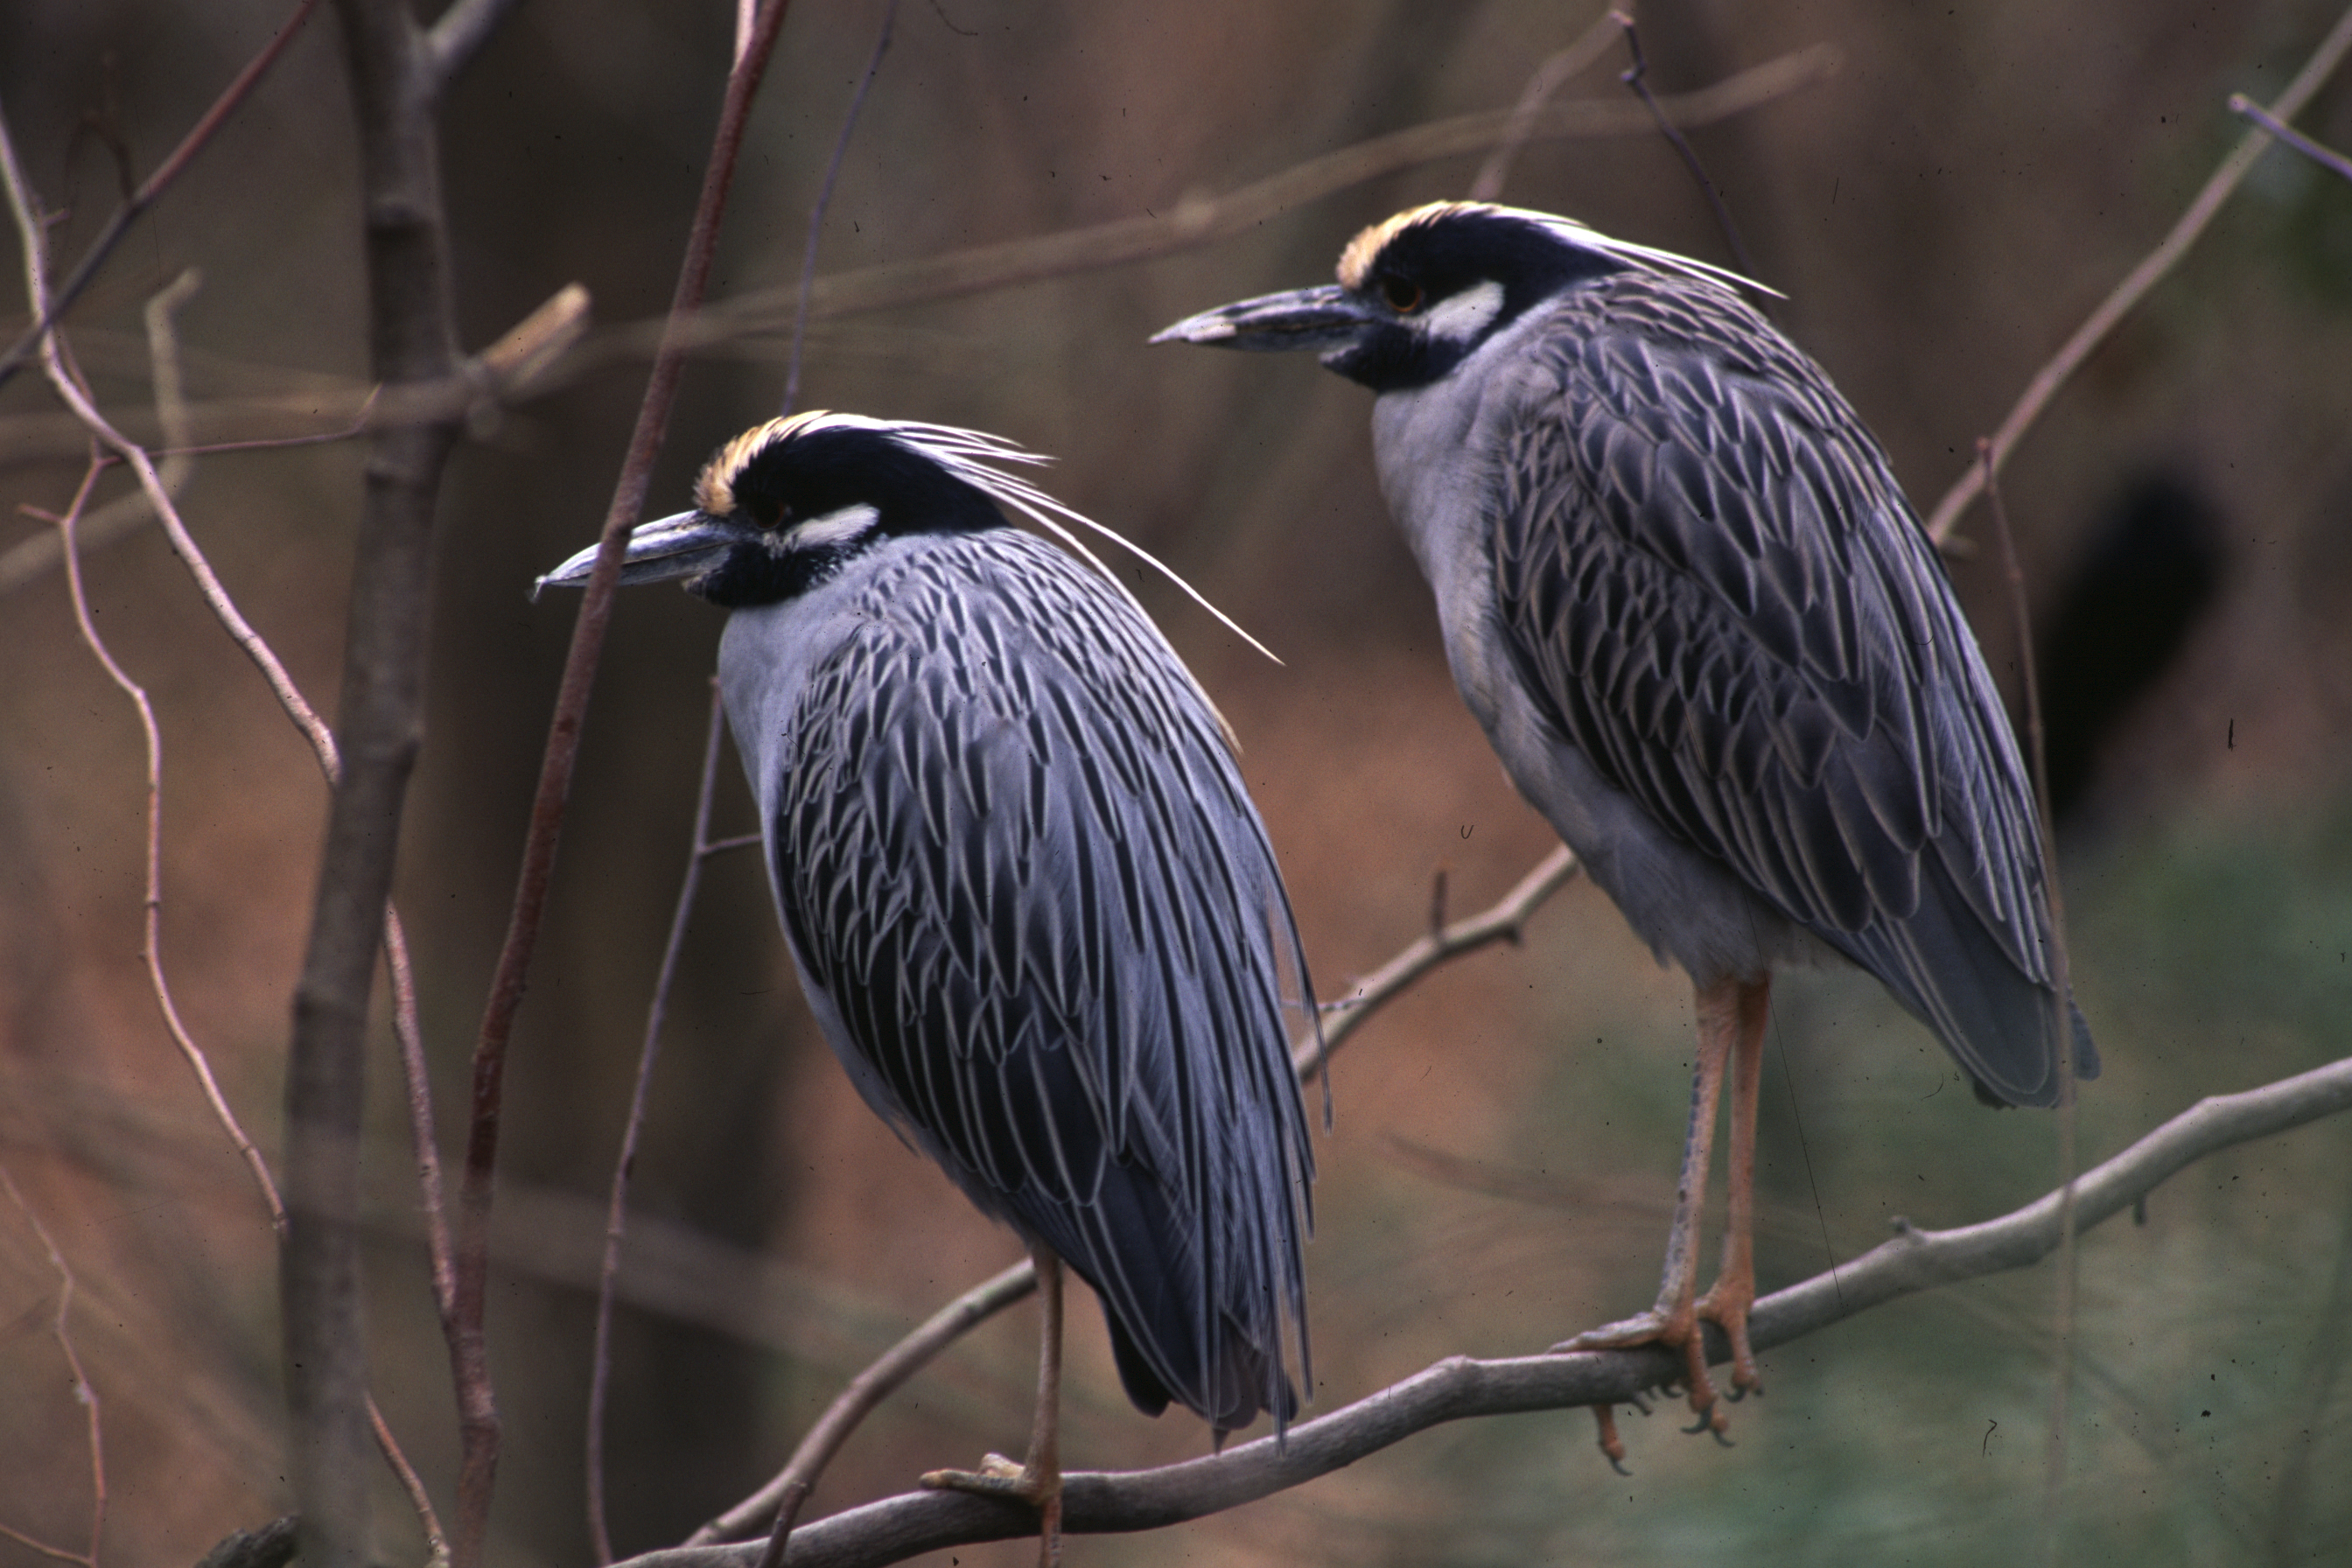 Two yellow-crowned night herons standing on a branch